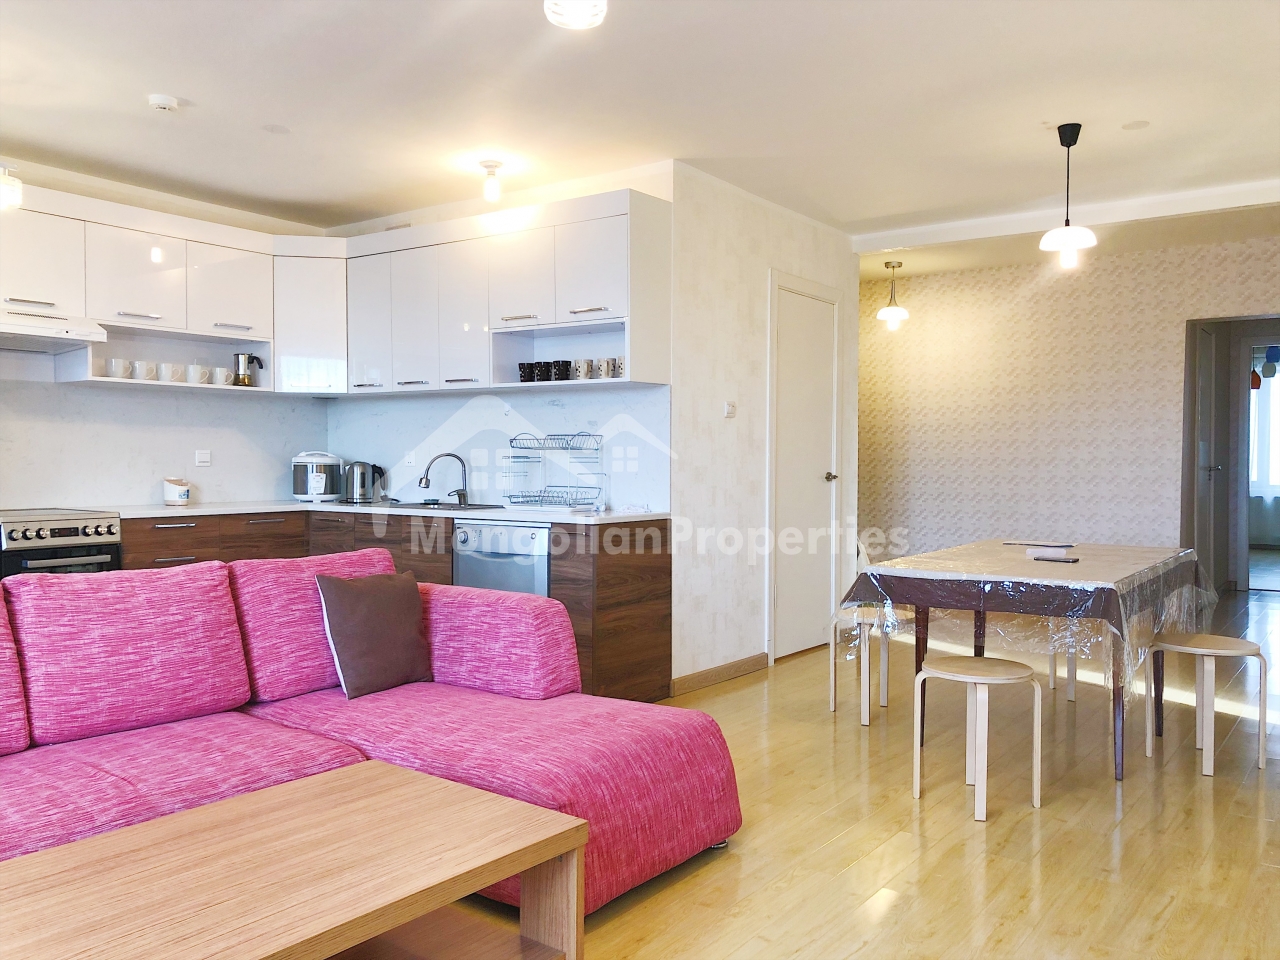 FOR RENT: Spacious 3 bedroom at UBtown / Seoul street / State Dept.